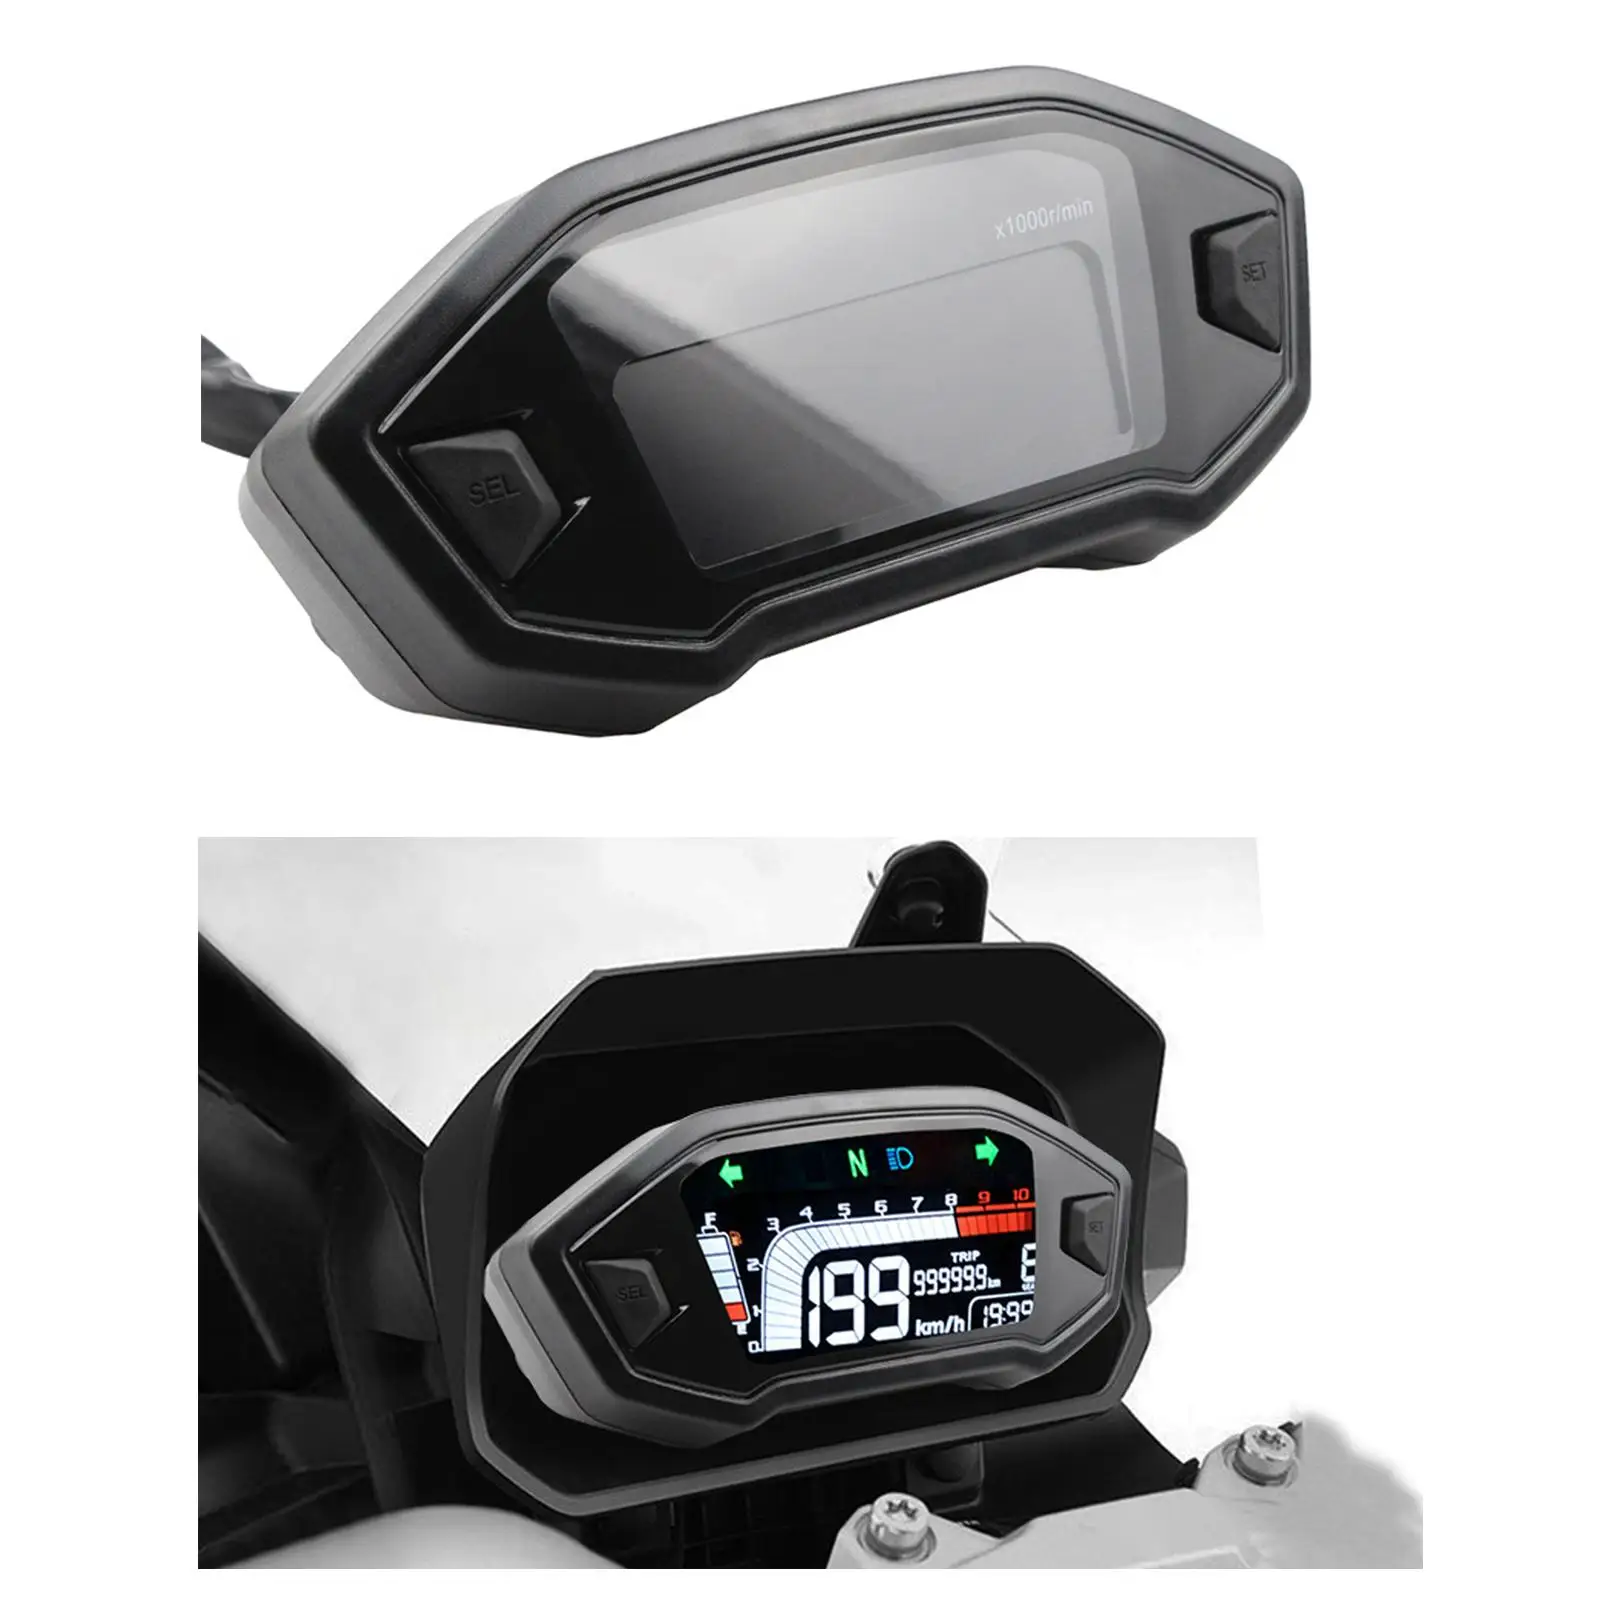 Motorcycle LCD Screen Digital  Universal DC 12V Easily Install Replaces , Speed Display in Kilometers or Miles